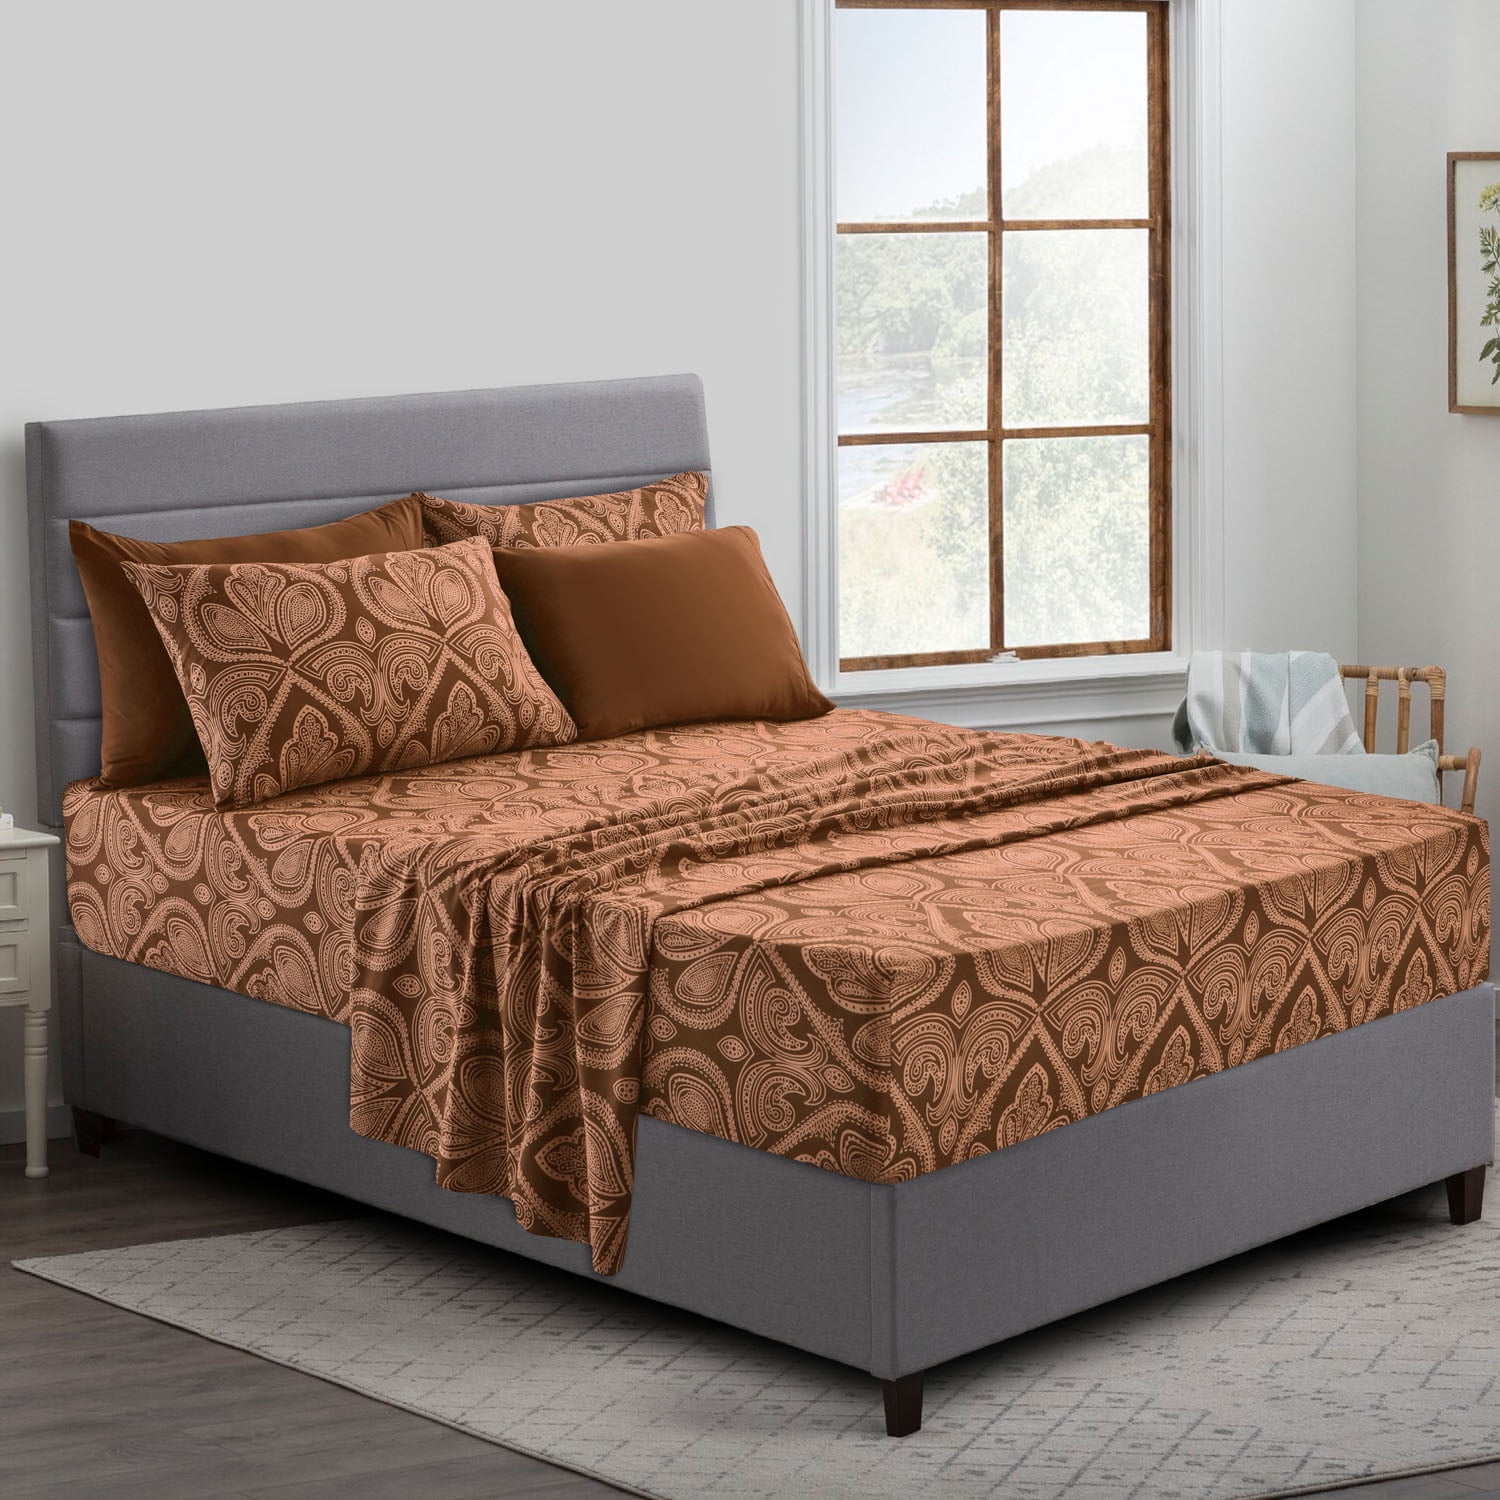 Details about   Elegant Comfort 1500 Thread Count Egyptian Quality 6 Piece Wrinkle Resistant Lux 